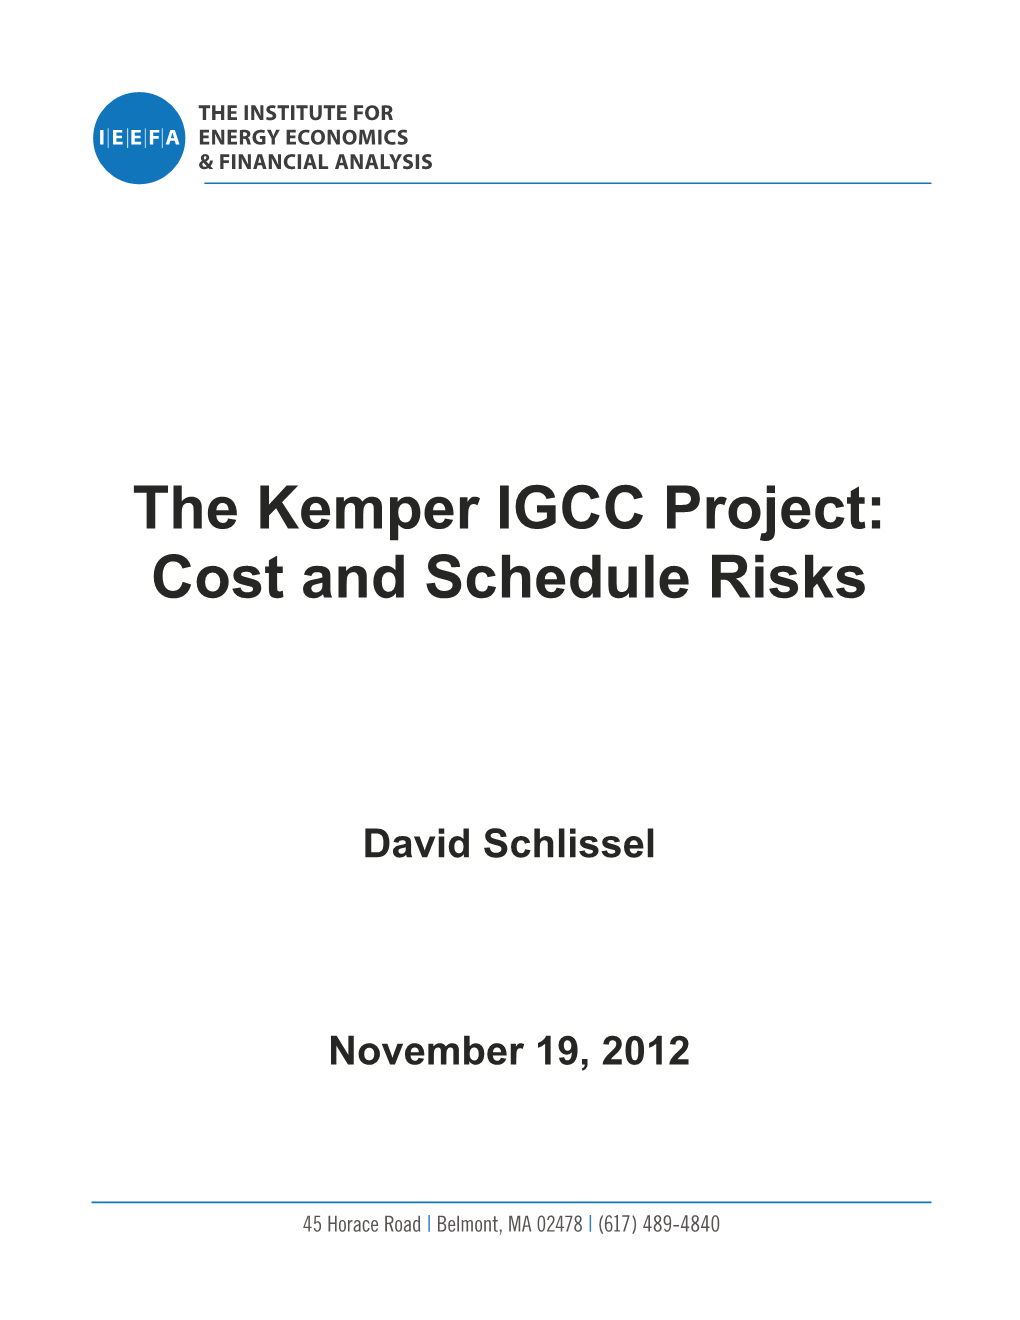 The Kemper IGCC Project: Cost and Schedule Risks